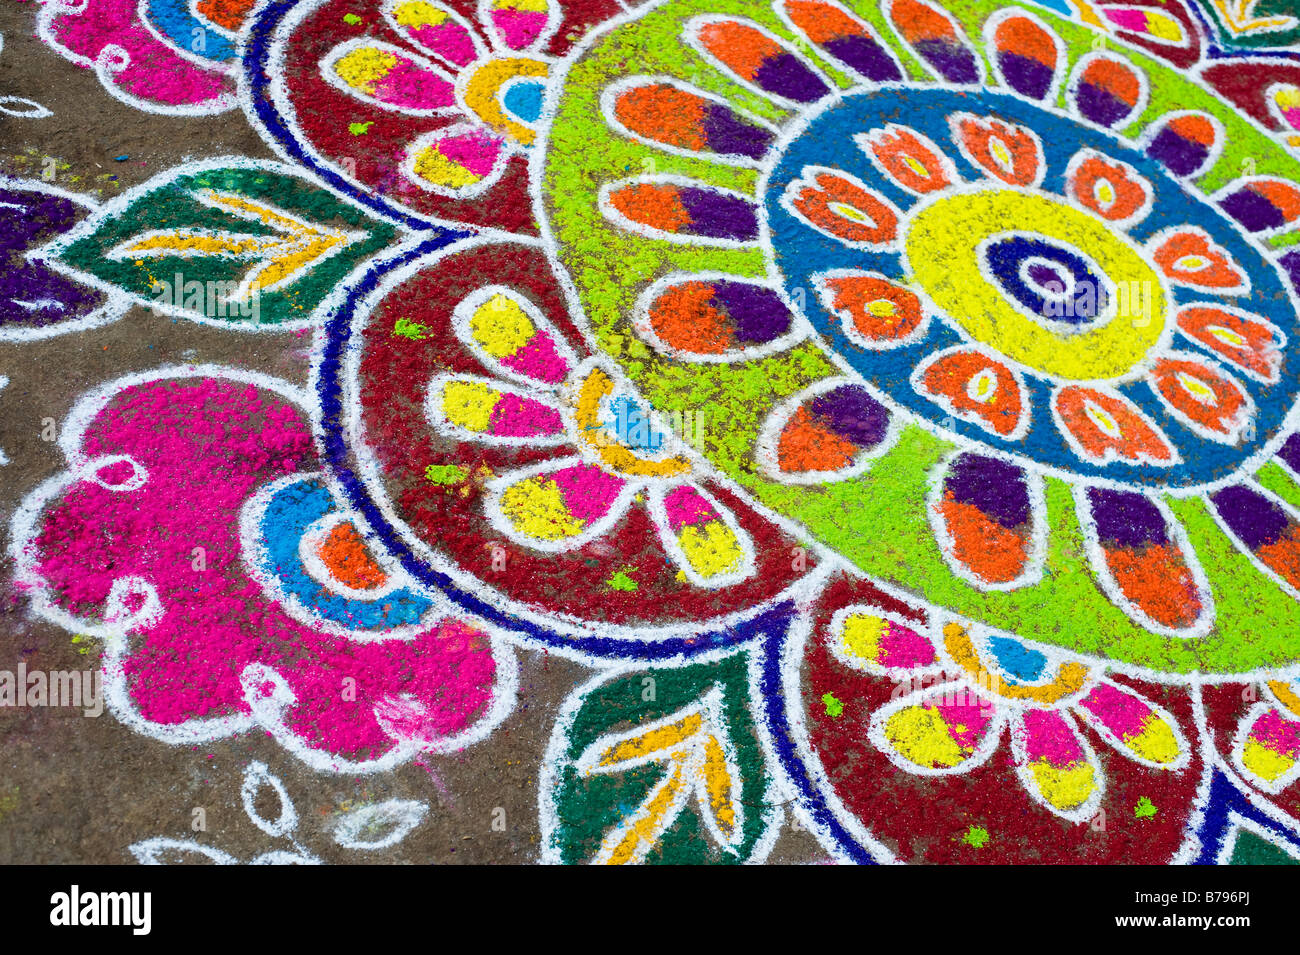 Rangoli festival designs in an Indian street made at the hindu ...